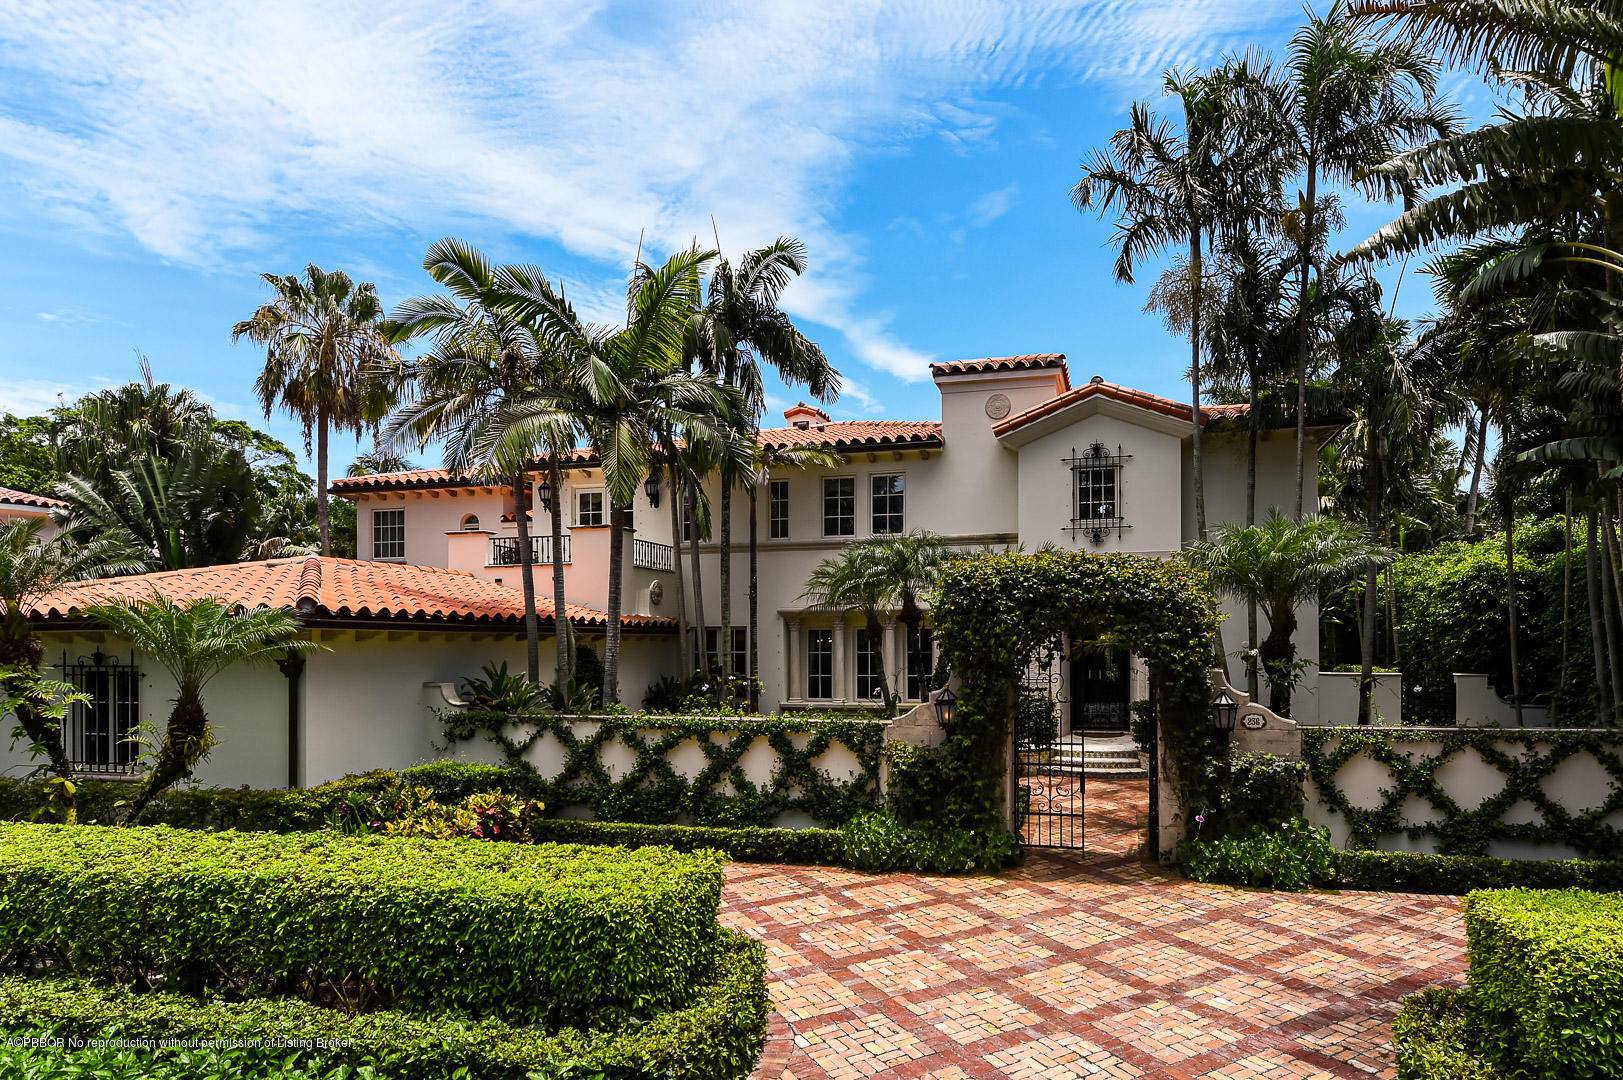 Elegant Mediterranean residence located in the exclusive Phipps Estate.